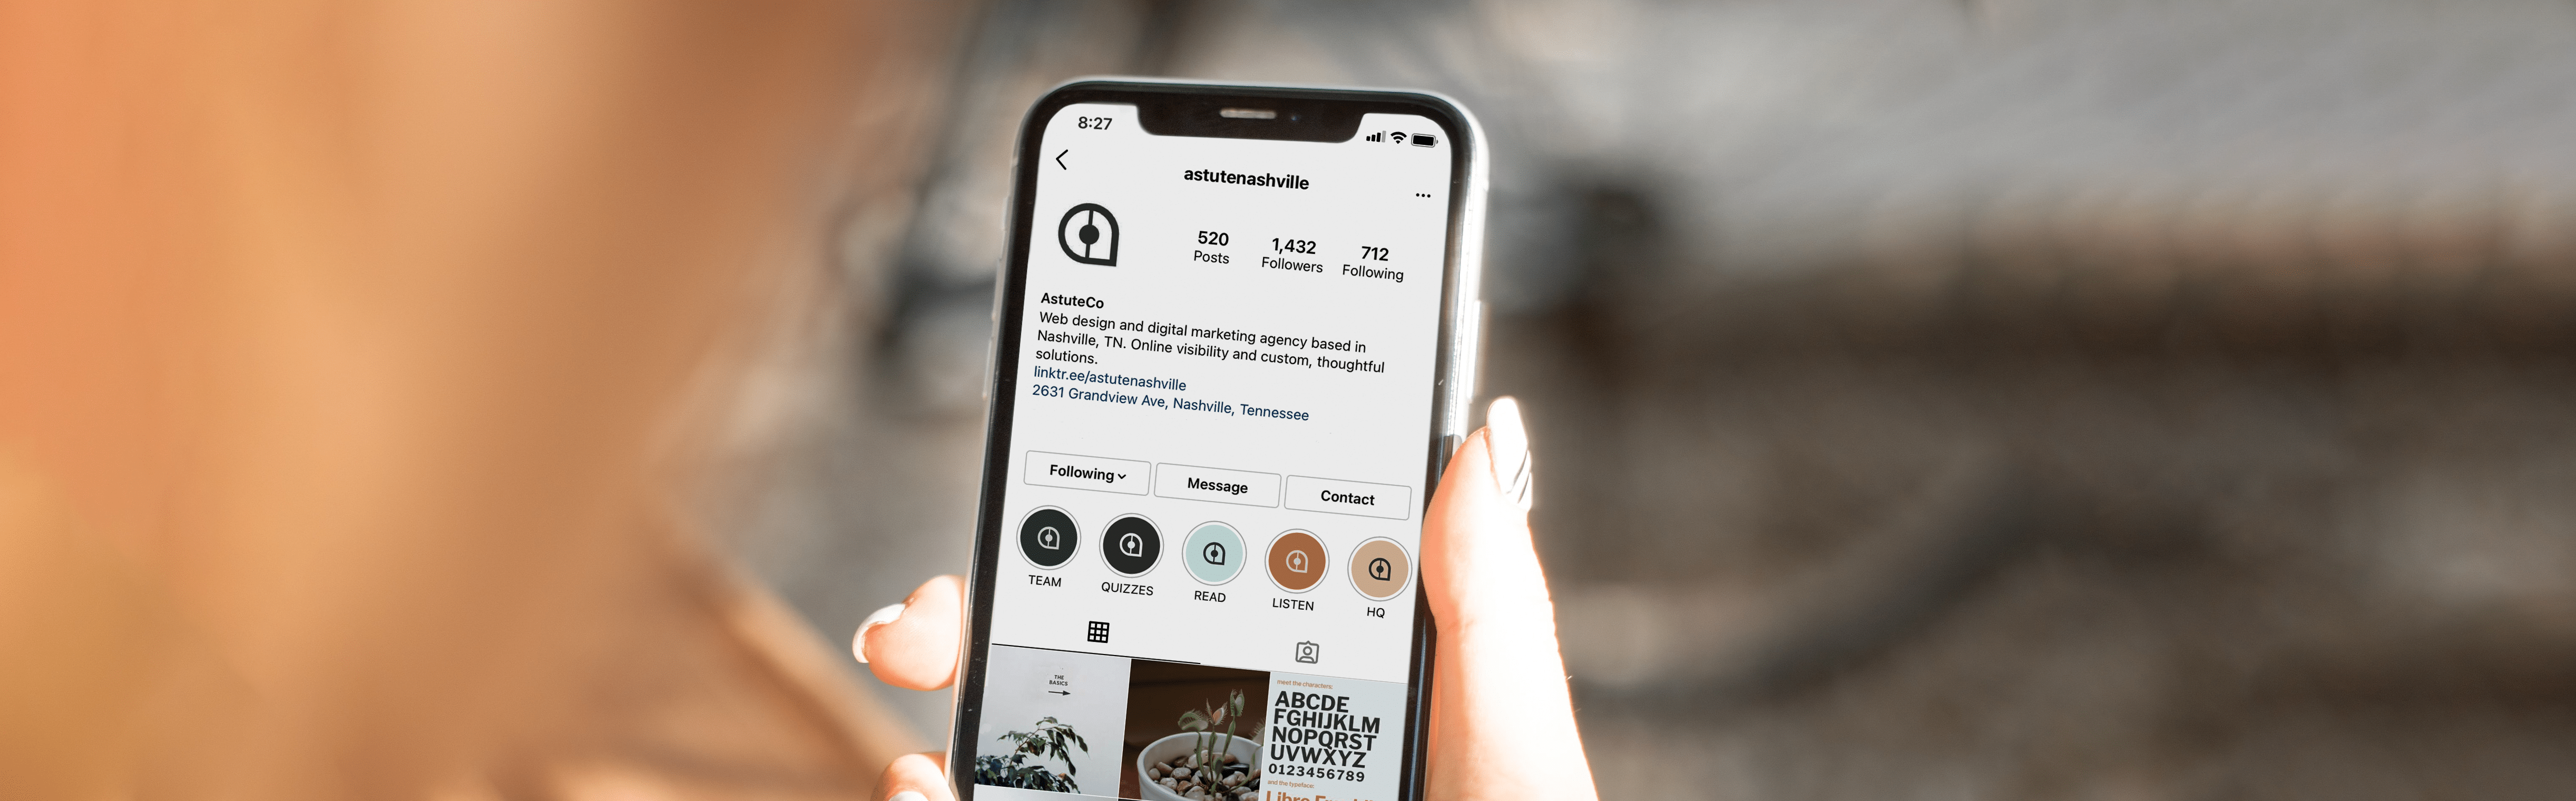 Using Instagram Stories to Grow Your Brand - Astute Communications